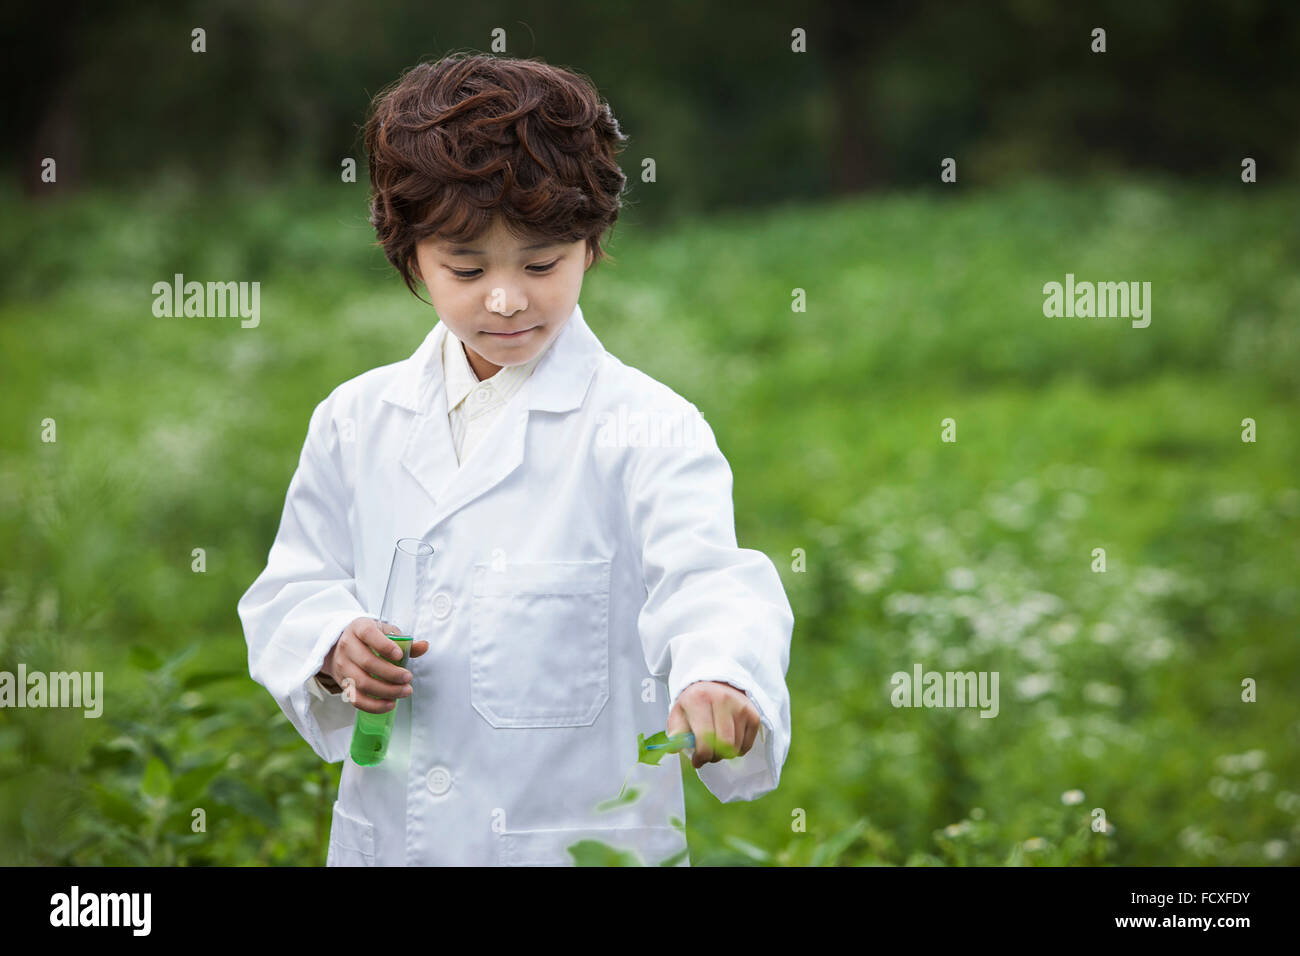 Boy in white gown holding a test tube and a leaf and looking down at field Stock Photo